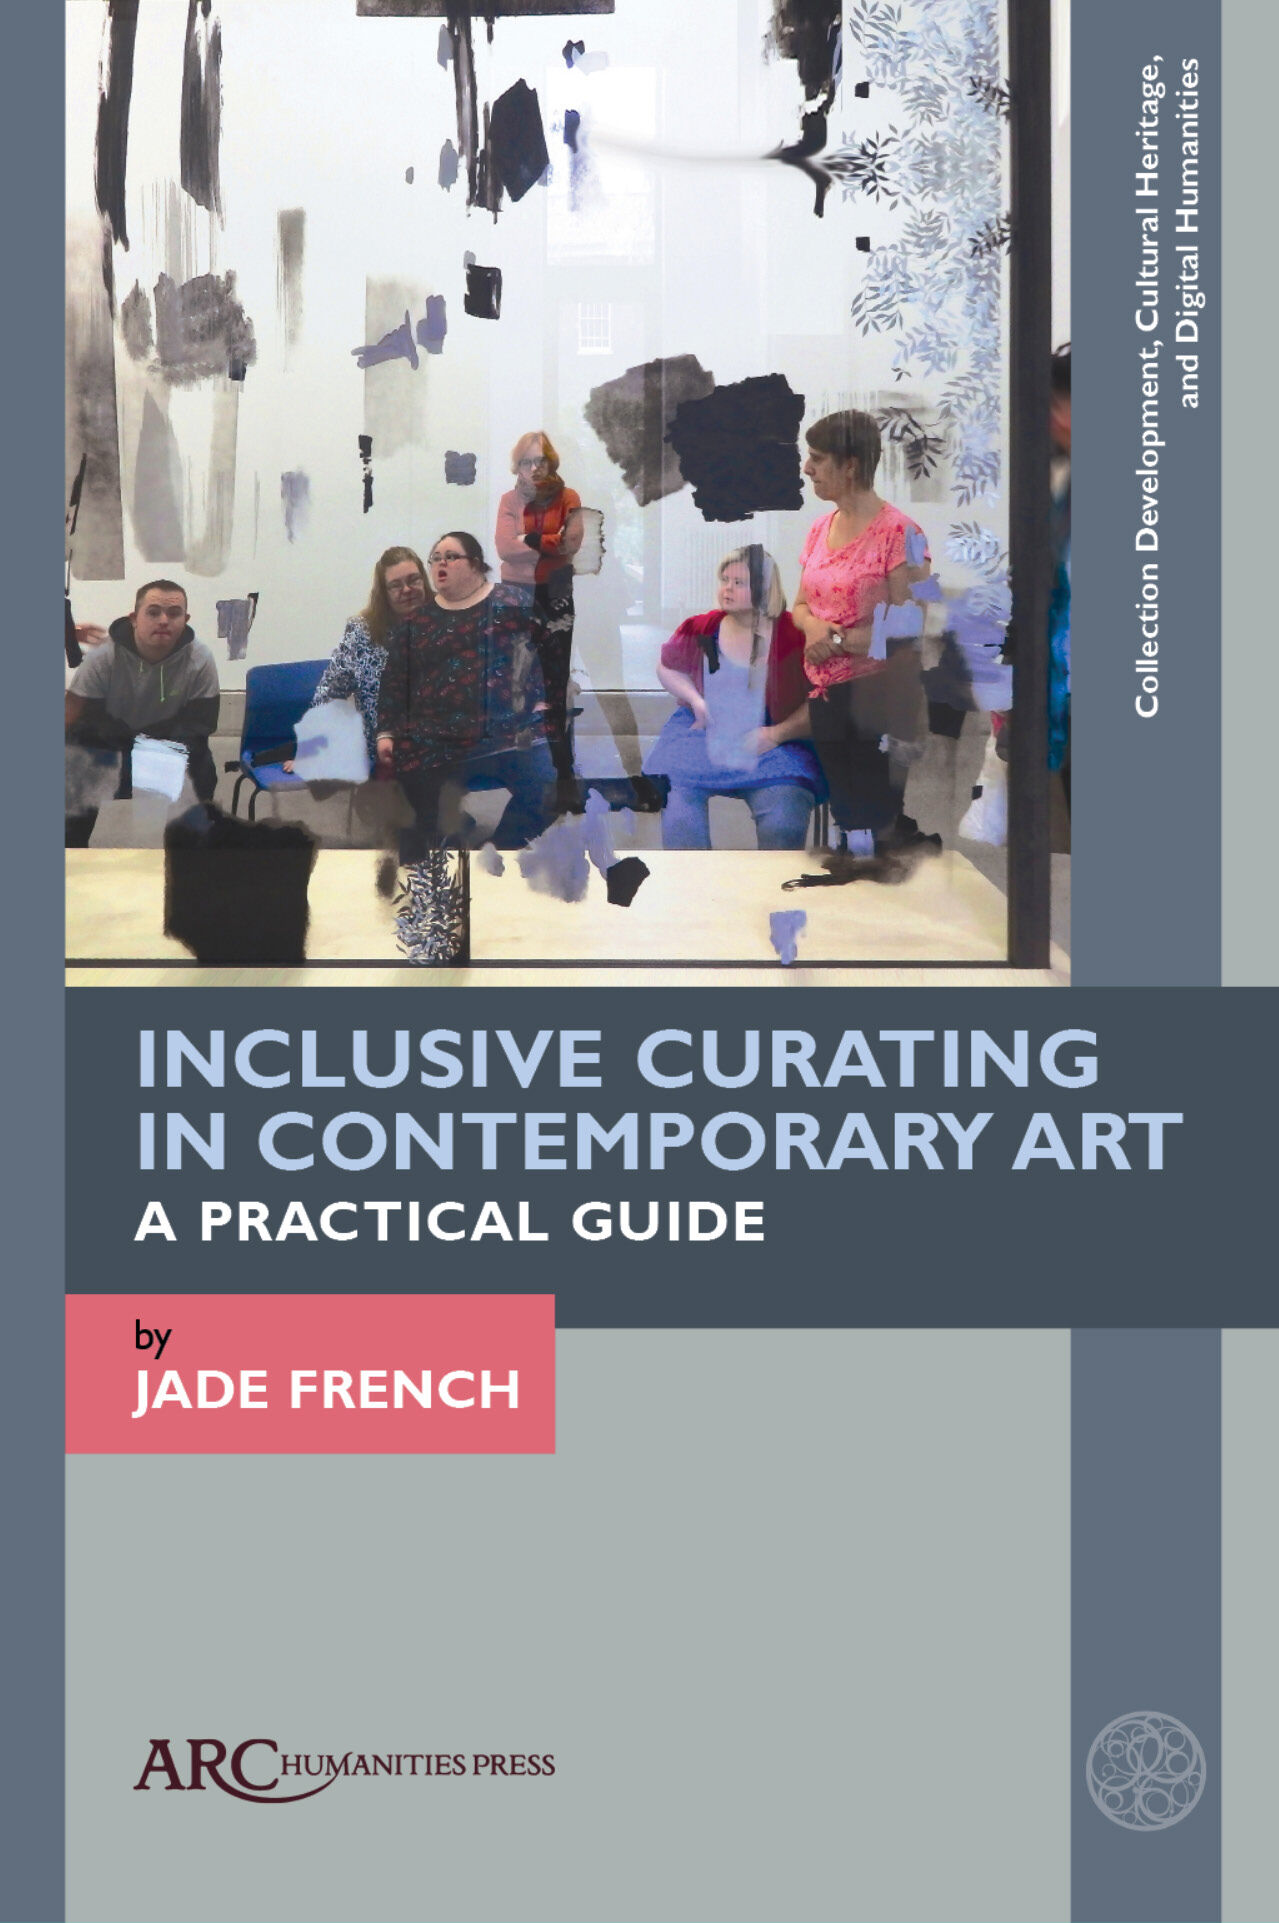 Book review. French J (2020). Inclusive Curating in Contemporary Art: A Practical Guide